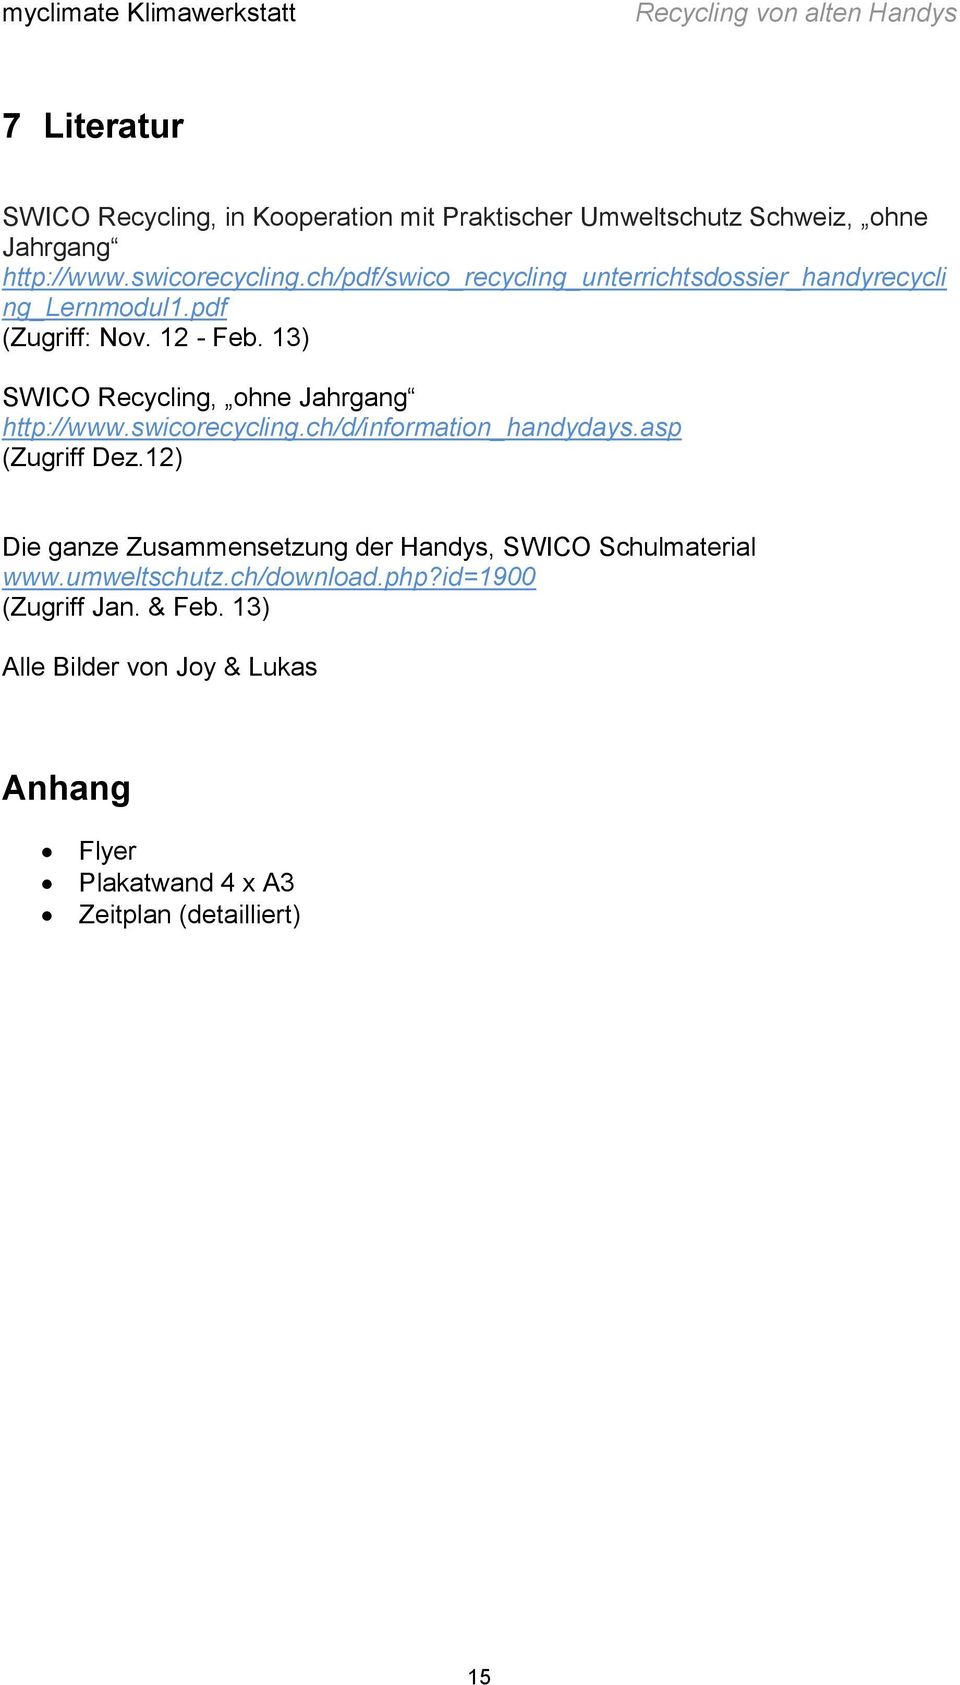 13) SWICO Recycling, ohne Jahrgang http://www.swicorecycling.ch/d/information_handydays.asp (Zugriff Dez.